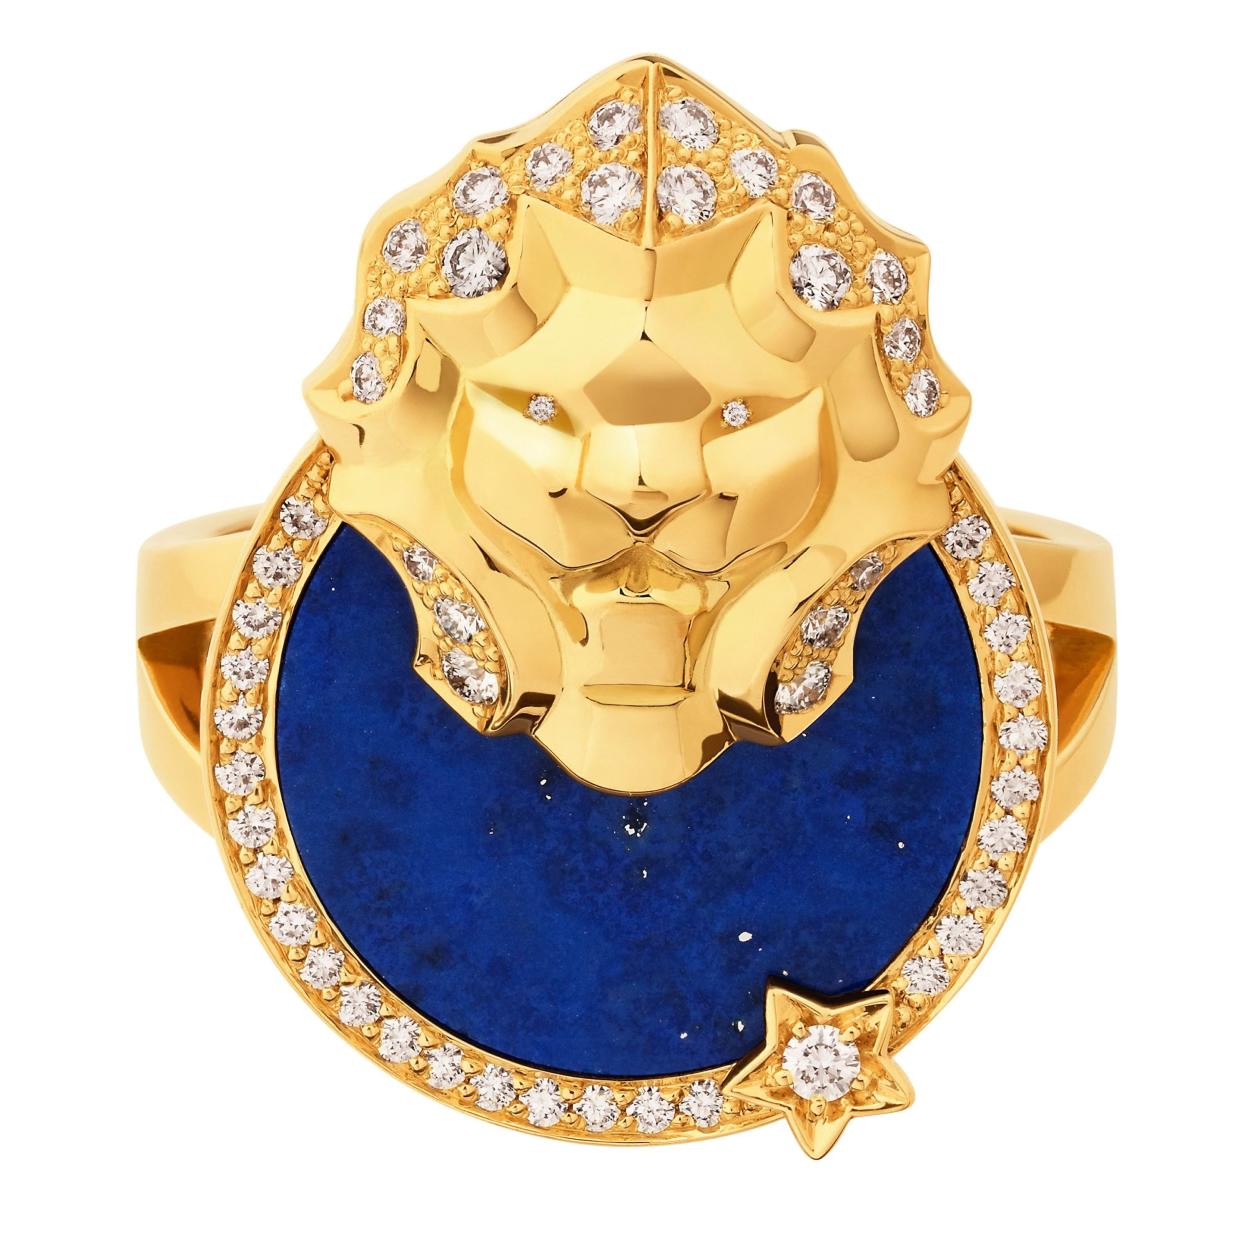 18ct gold, diamond and lapis lazuli Lion Medaille ring, £7,000, Chanel